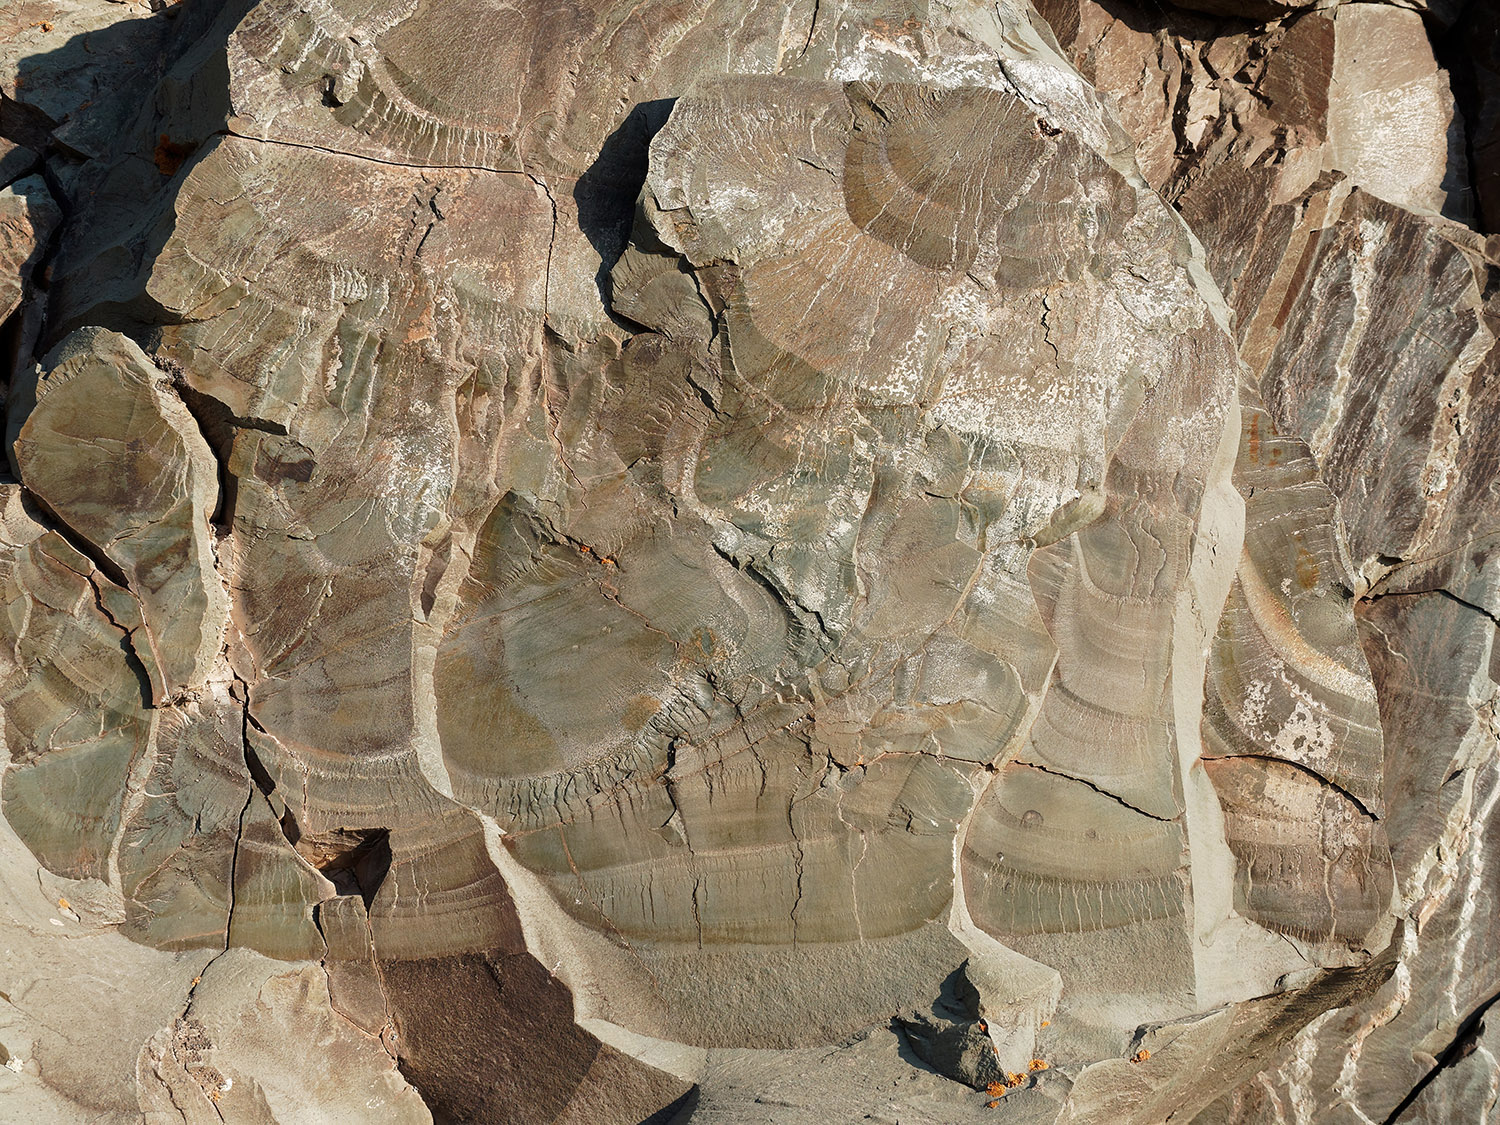 Contorted beds mostly of siltite in the Appekunny formation.  Rapid deposition of thick layers of sediment on top of very soft mud caused the thick layers to sink into and deform the underlying mud.  Billions of years of pressure and heat resulted in the contorted pattern in hard rock.